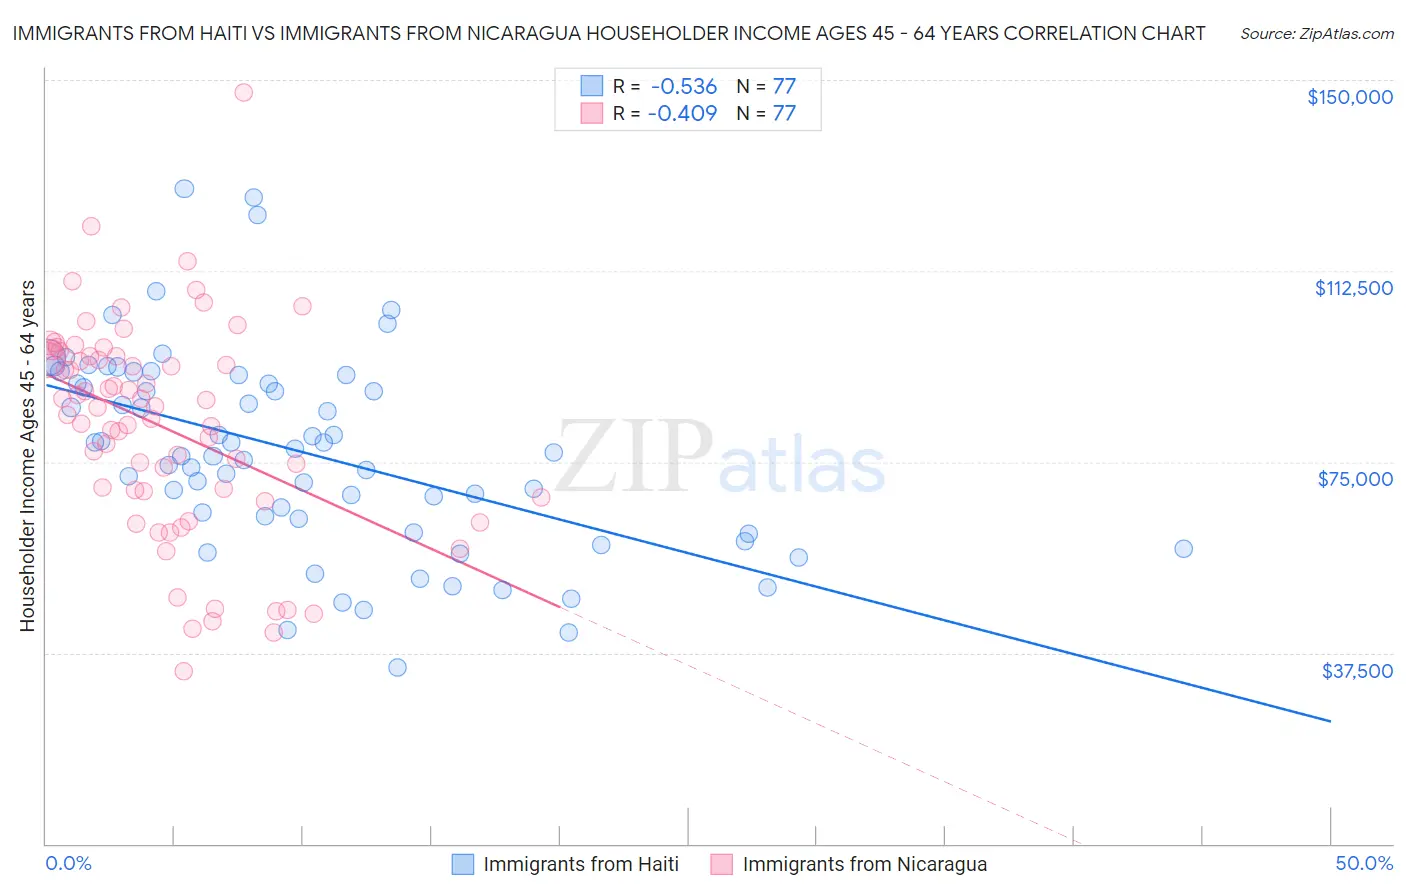 Immigrants from Haiti vs Immigrants from Nicaragua Householder Income Ages 45 - 64 years